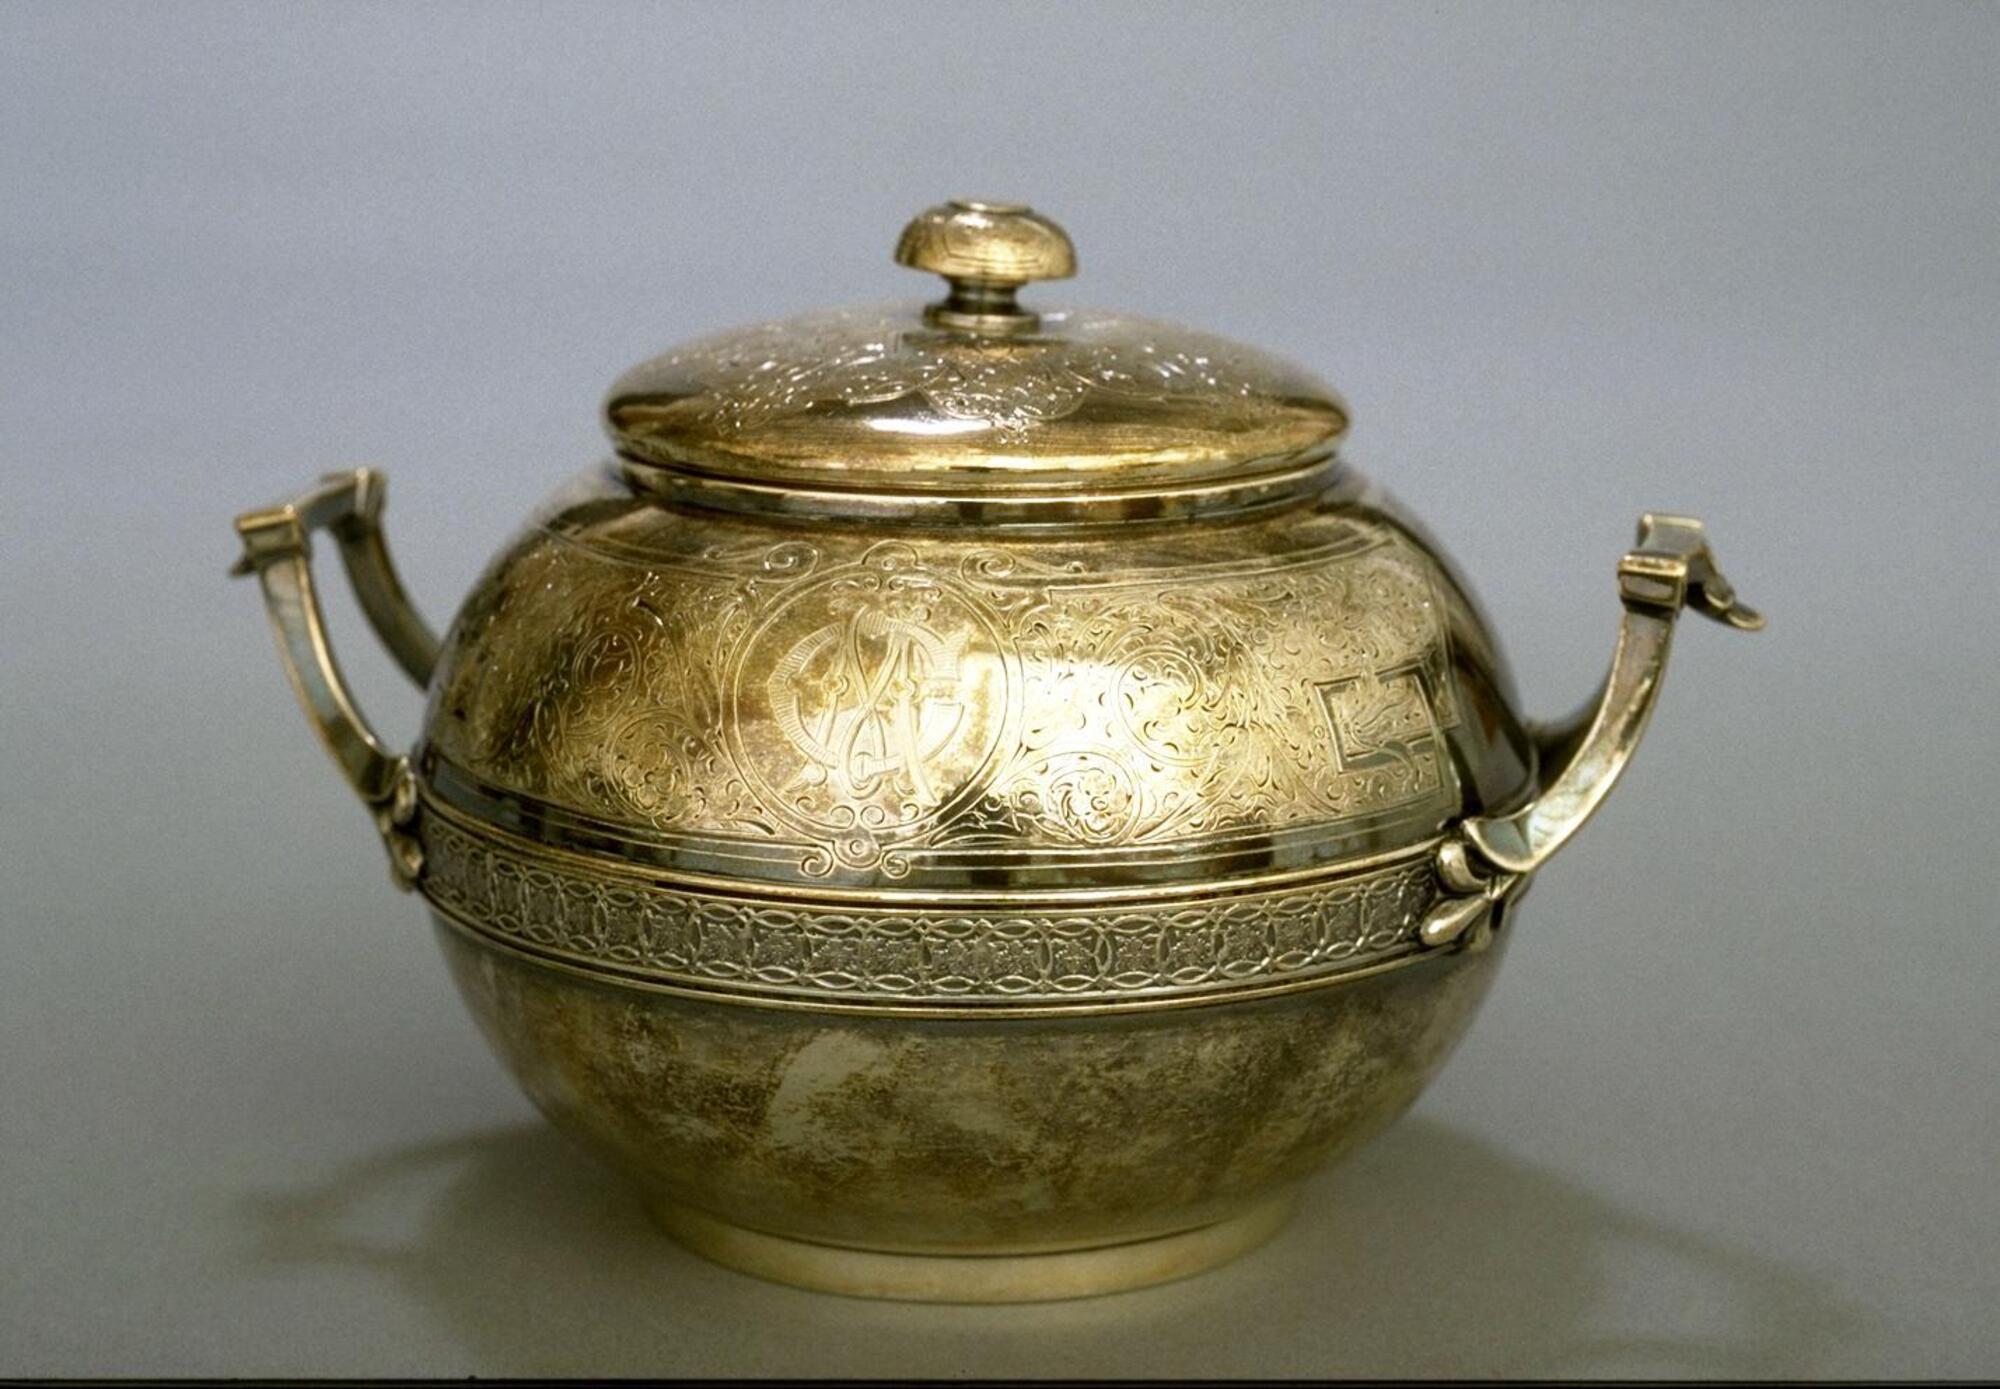 Two-handled jar-shaped silver vessel with lid and a band of decoration around center of the body